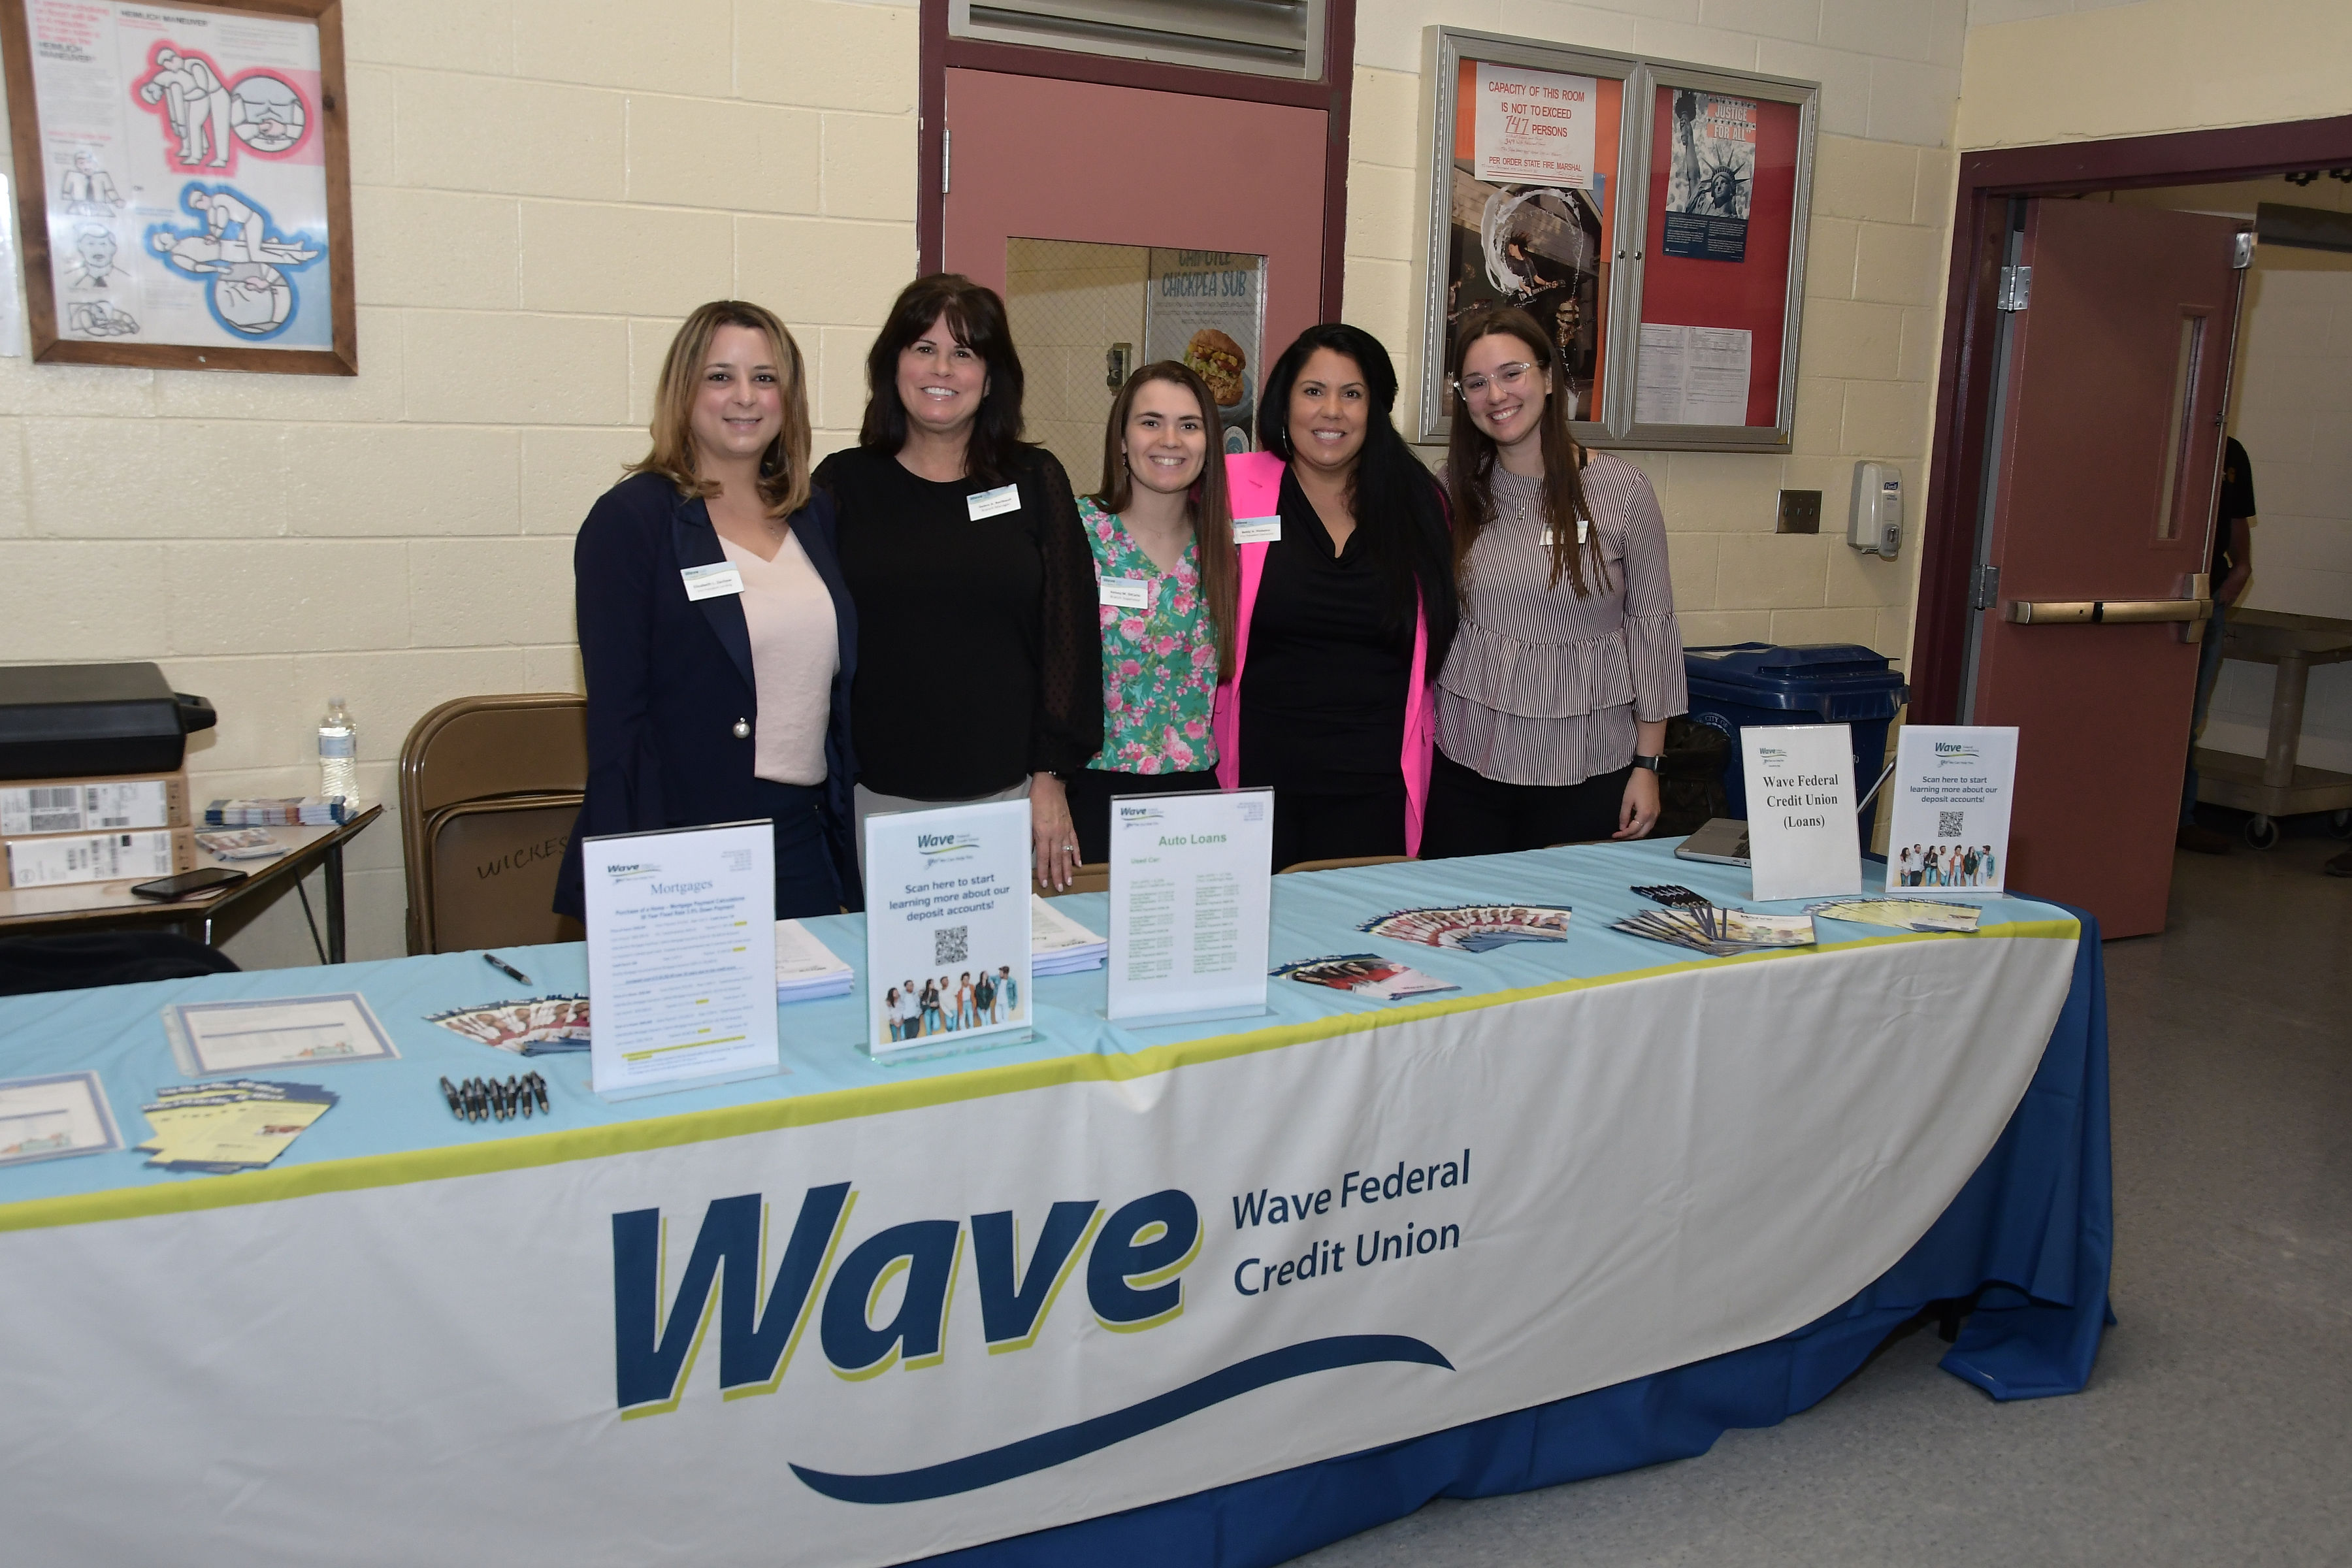 WAVE staff at their table booth